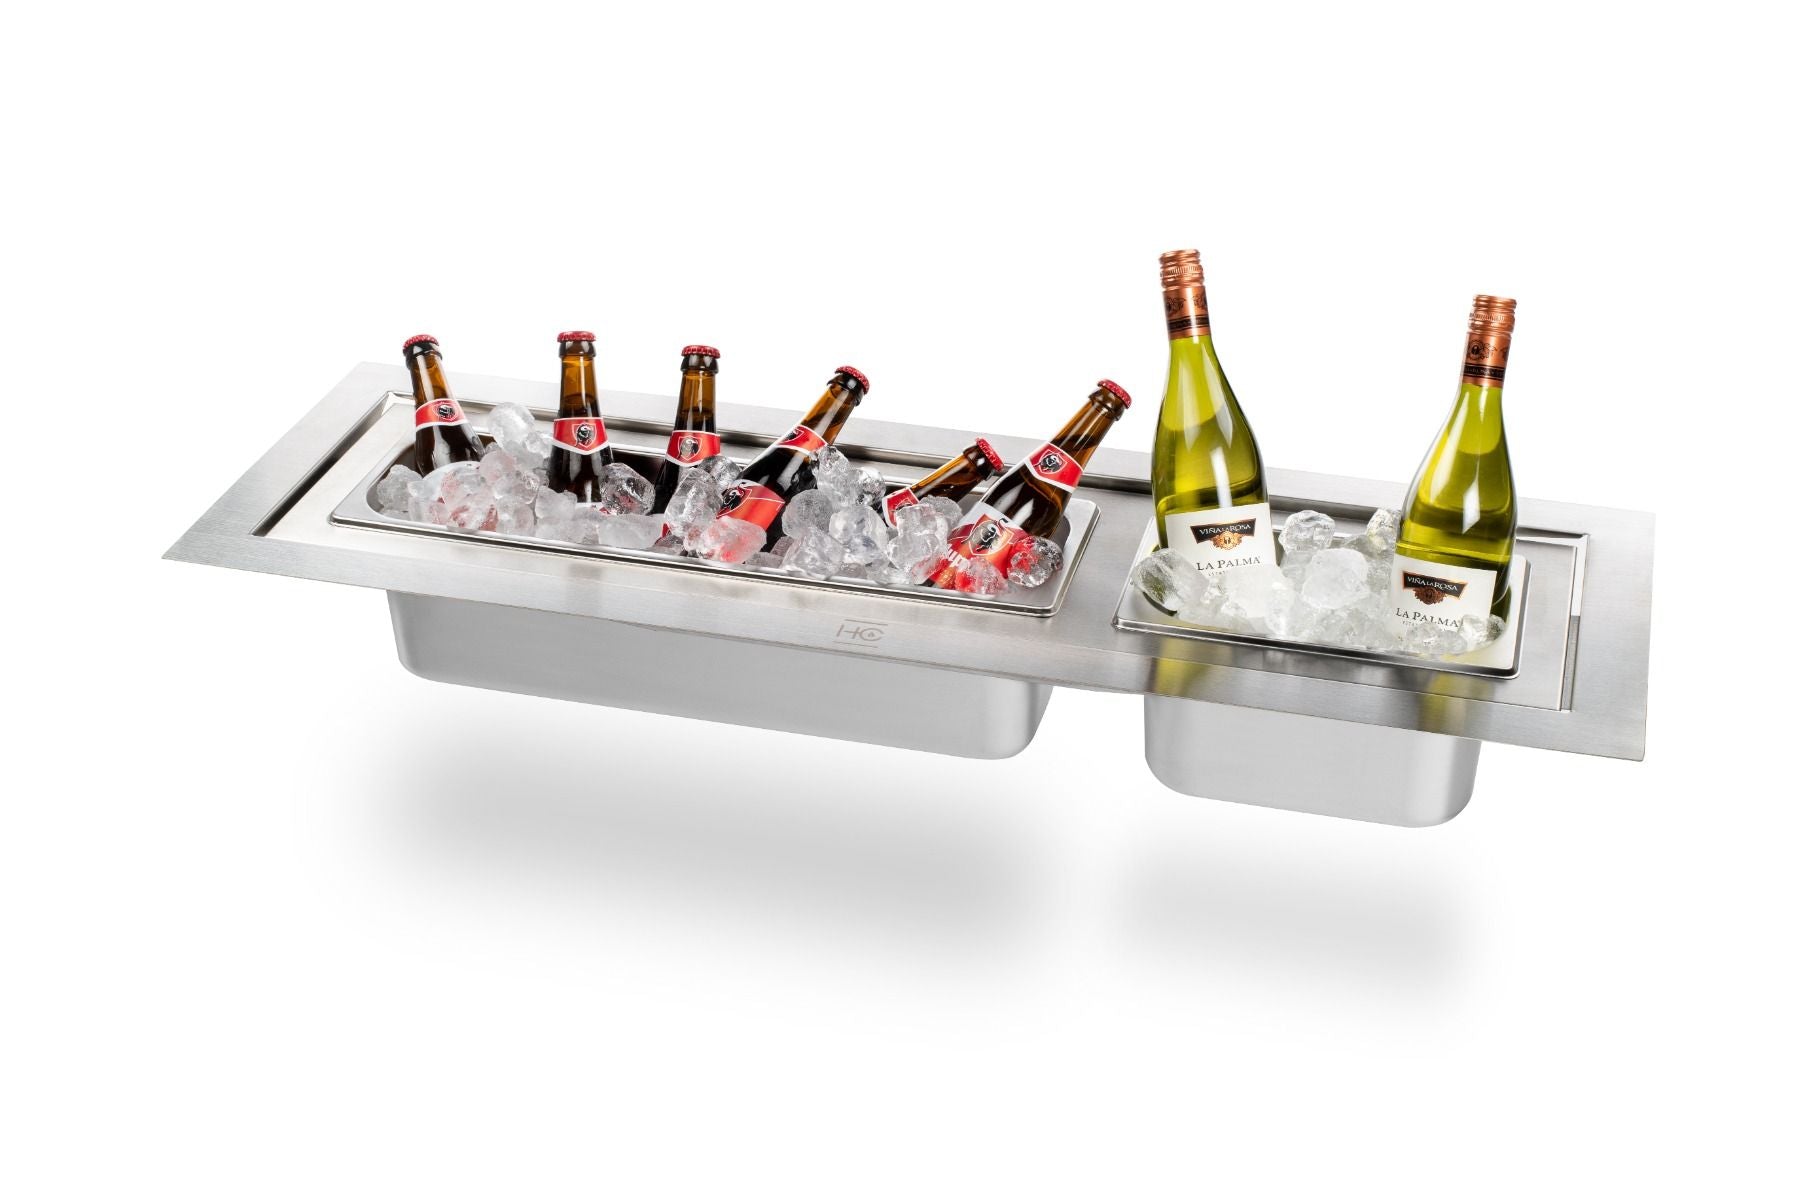 Built-in Table Wine Cooler